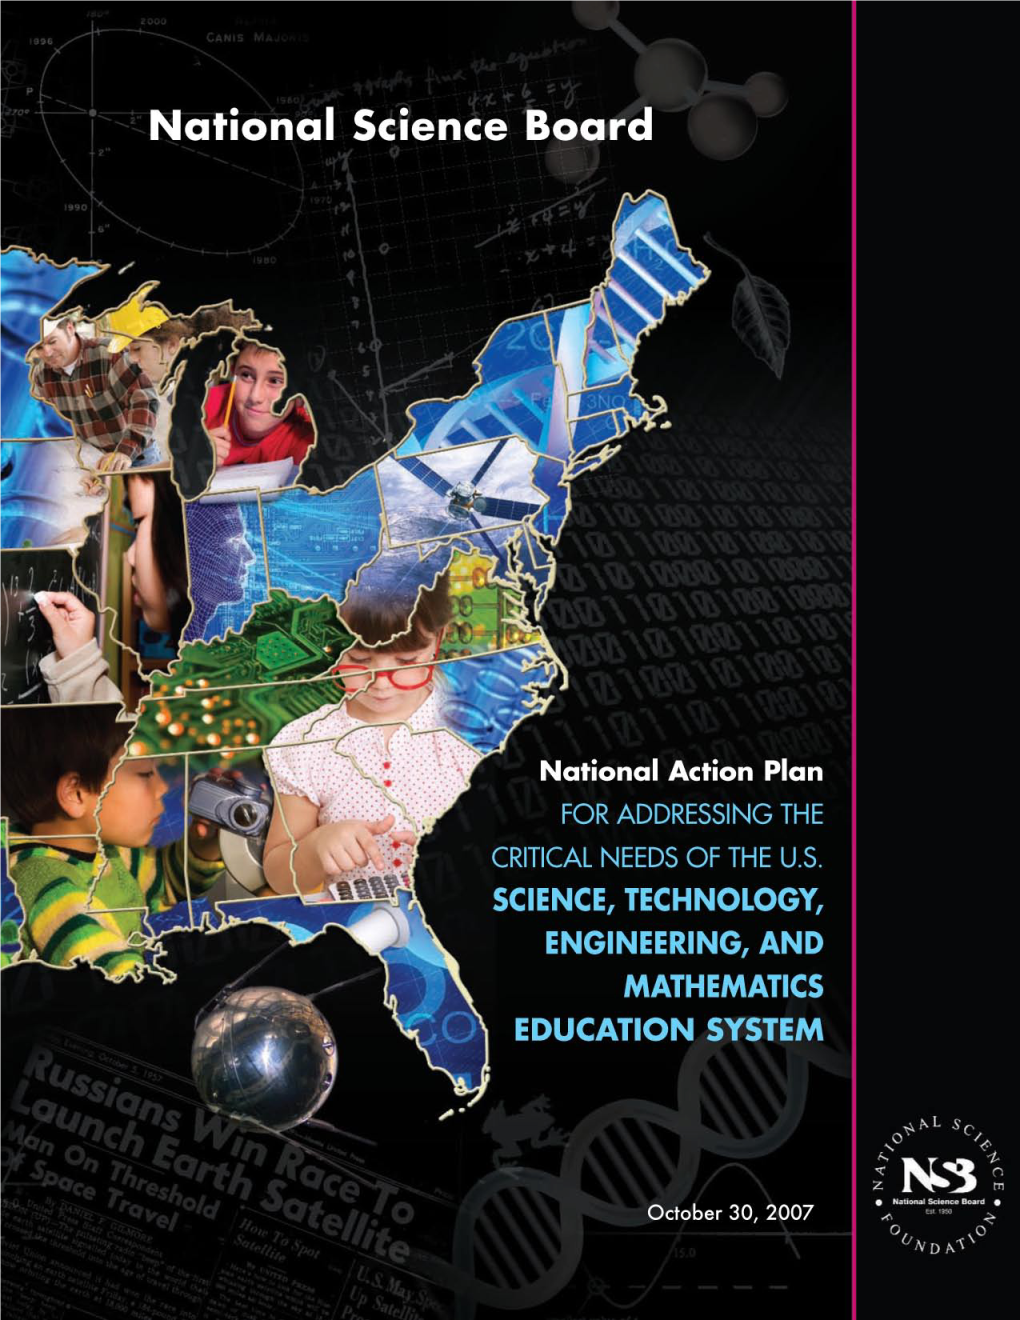 National Action Plan for Addressing the Critical Needs of the US